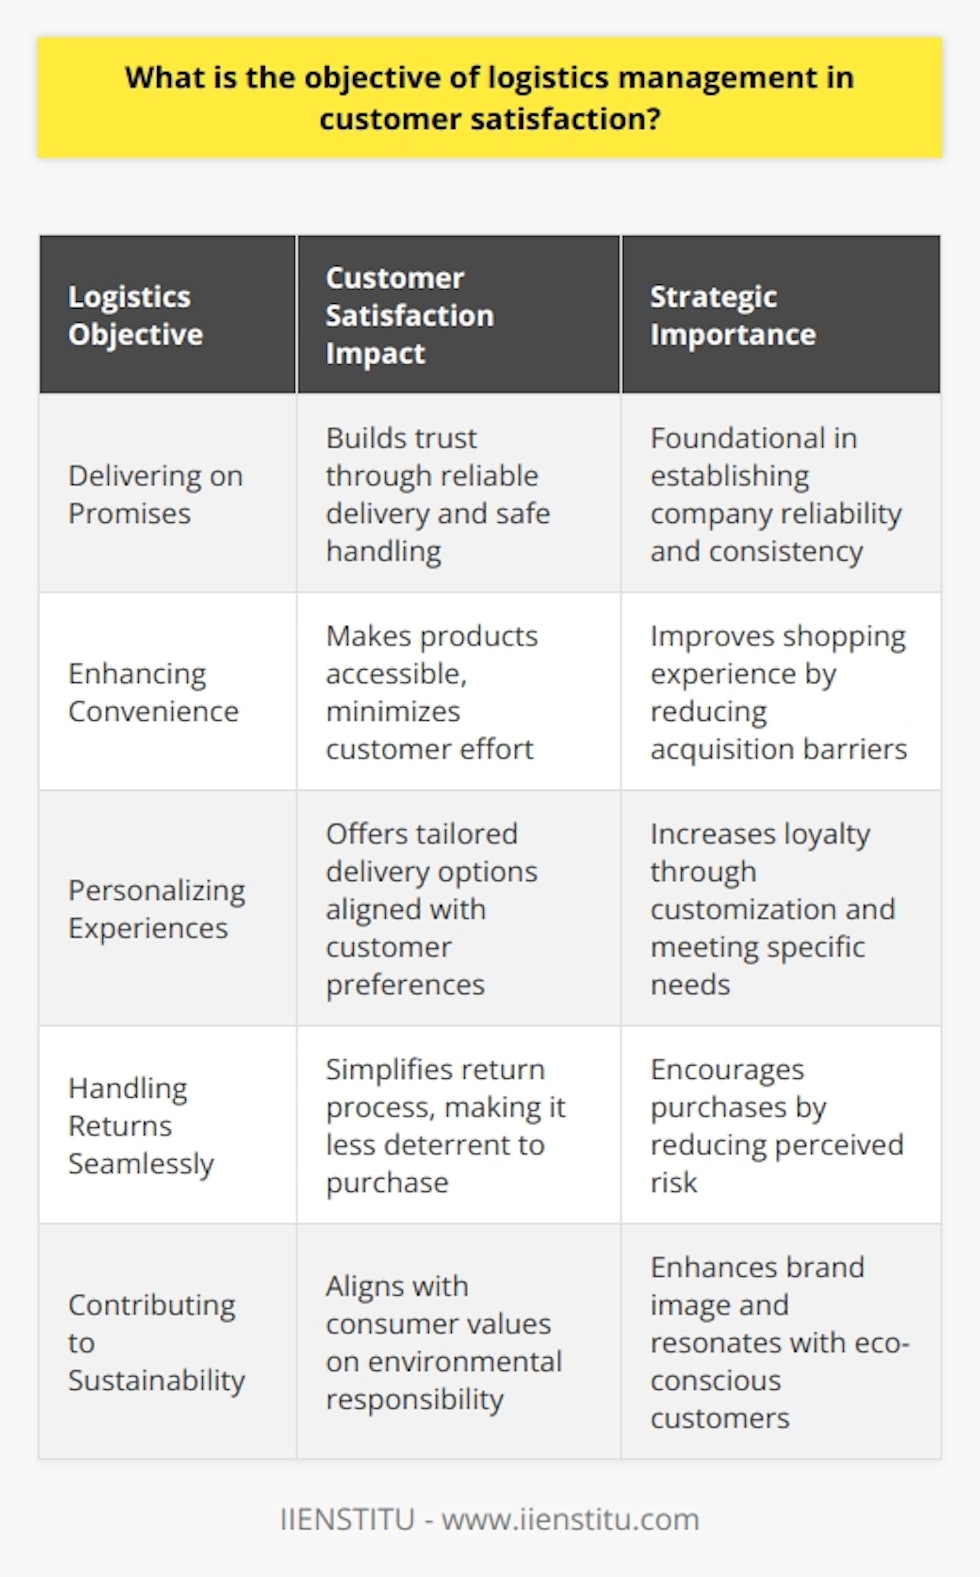 The objective of logistics management in customer satisfaction revolves around meticulously orchestrating the procurement, movement, and storage of goods in a way that aligns with consumer requirements, ensuring a smooth customer experience from order placement to final delivery. This task is crucial as it significantly influences how customers perceive a company's effectiveness and reliability, directly affecting their satisfaction and loyalty.Delivering on PromisesAt its core, logistics management aims to deliver on the promises made to customers. Whether it's next-day delivery or safe handling of fragile items, meeting customer expectations is paramount. By doing so, businesses foster trust and build a reputation for dependability, which is a key driver of customer satisfaction.Enhancing ConvenienceModern customers value convenience highly, and logistics management seeks to optimize this aspect by ensuring that products are readily available at the point of purchase whether online or in physical stores. This limits the amount of effort customers need to exert to obtain the products they want, thereby enhancing their overall shopping experience and satisfaction.Personalizing ExperiencesWith the advance in data analytics and logistics technologies, organizations are increasingly able to offer personalized shipping and delivery experiences to customers. This can include options for preferred delivery times, alternative drop-off points, and even eco-friendly shipping options. Personalizing the customer's logistics experience in this manner can significantly boost satisfaction and encourage repeat business.Handling Returns SeamlesslyEffective logistics management also encompasses return policies and processes. A hassle-free, easy-to-navigate returns system is critical for customer satisfaction. Businesses strive to simplify the returns process, making it less of a deterrent to purchase items that might not be exactly what the customer is looking for.Contributing to SustainabilityIn an age where environmental impact is increasingly influencing consumer choices, logistics management also plays a role in ensuring sustainable practices. Minimizing waste and reducing carbon footprints through optimized routes and eco-friendly packaging are just some ways that logistics can contribute to a company's sustainability goals, aligning with the values of environmentally-conscious customers and enhancing their satisfaction with the brand.Through precision in the execution of these objectives, logistics management forms a hidden but integral backbone to customer satisfaction. Its importance cannot be overstated as, in a competitive market, the ability of a business to consistently fulfill logistical promises is a decisive factor in winning and retaining customers.